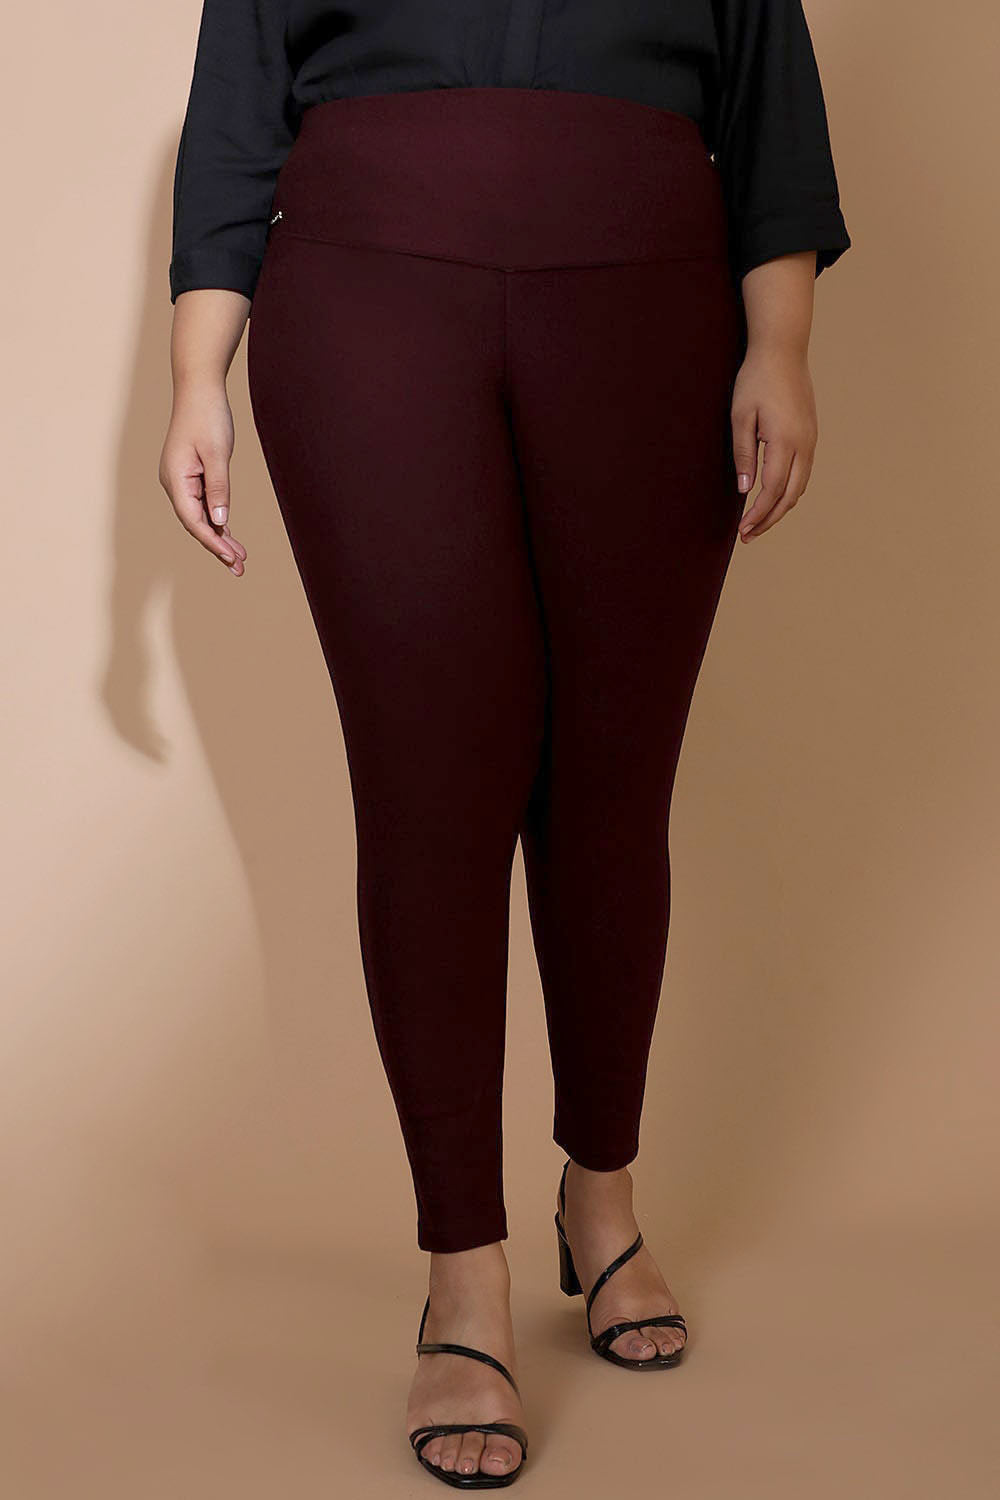 Plus Size Wine Red Tummy Tucker Jeggings Online in India